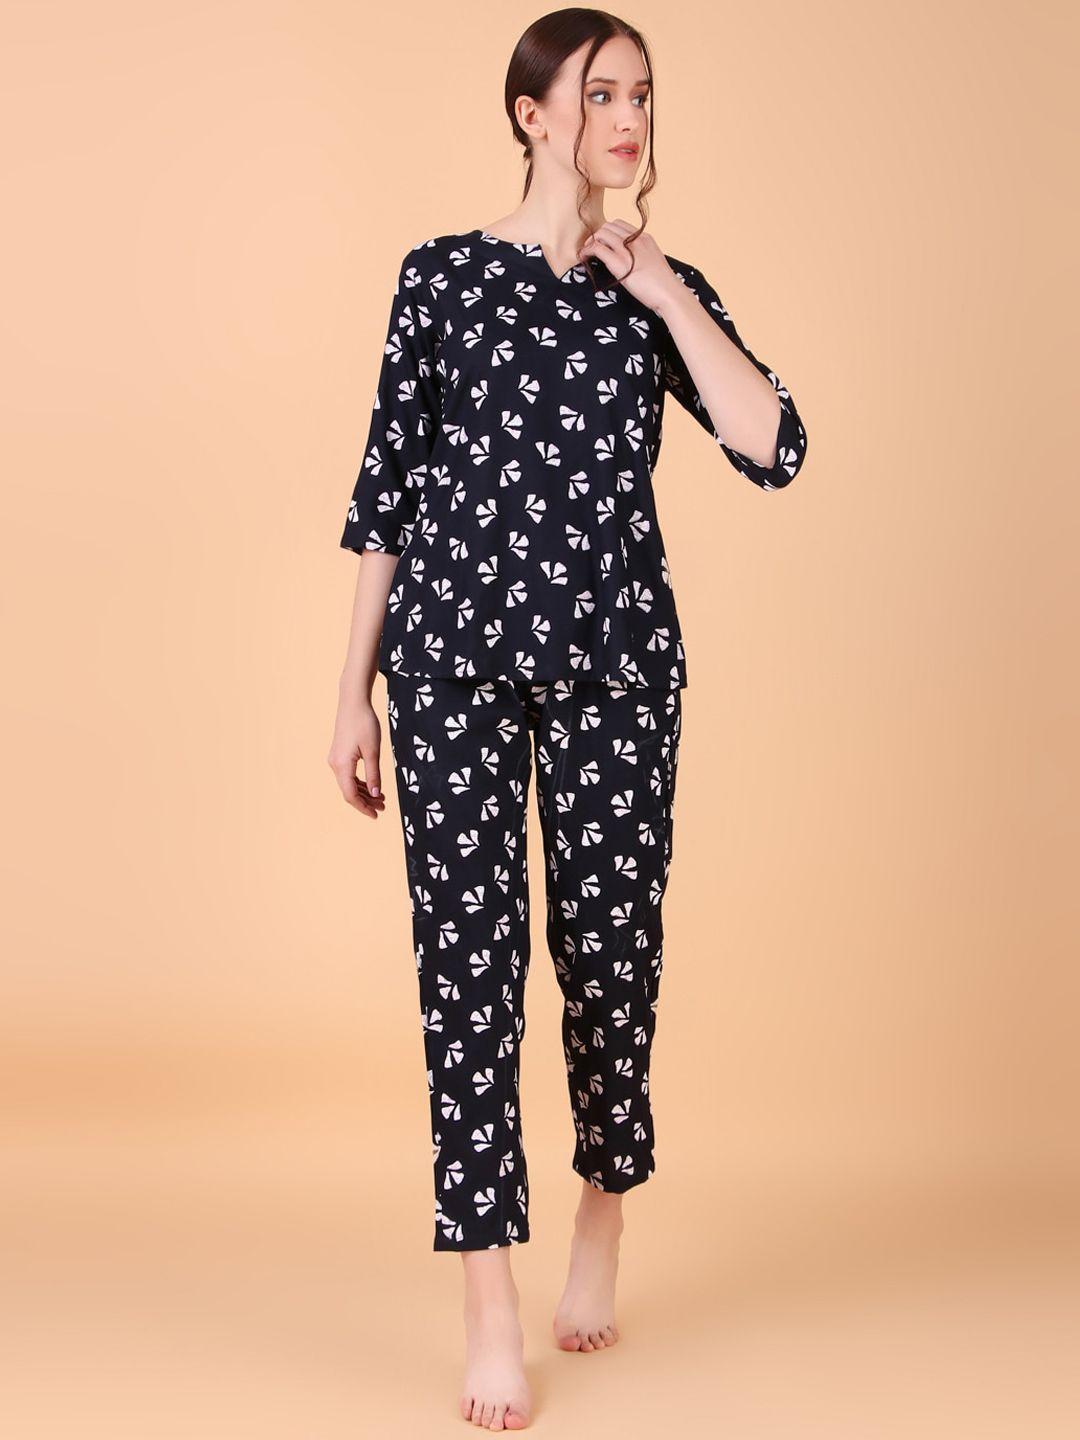 ichaa floral printed notched neck top with pyjamas